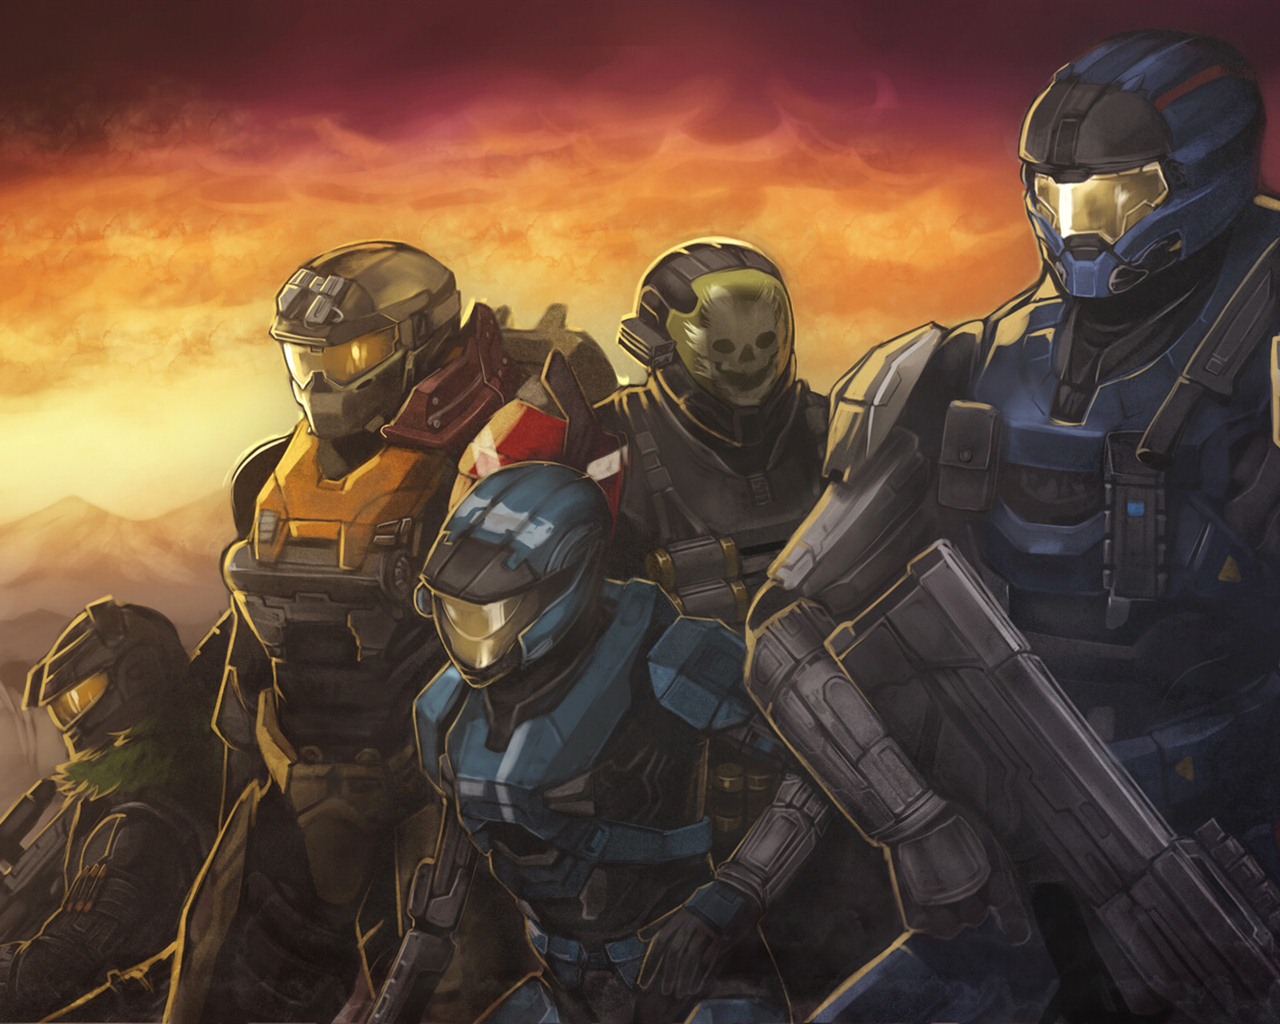 Halo game HD wallpapers #20 - 1280x1024